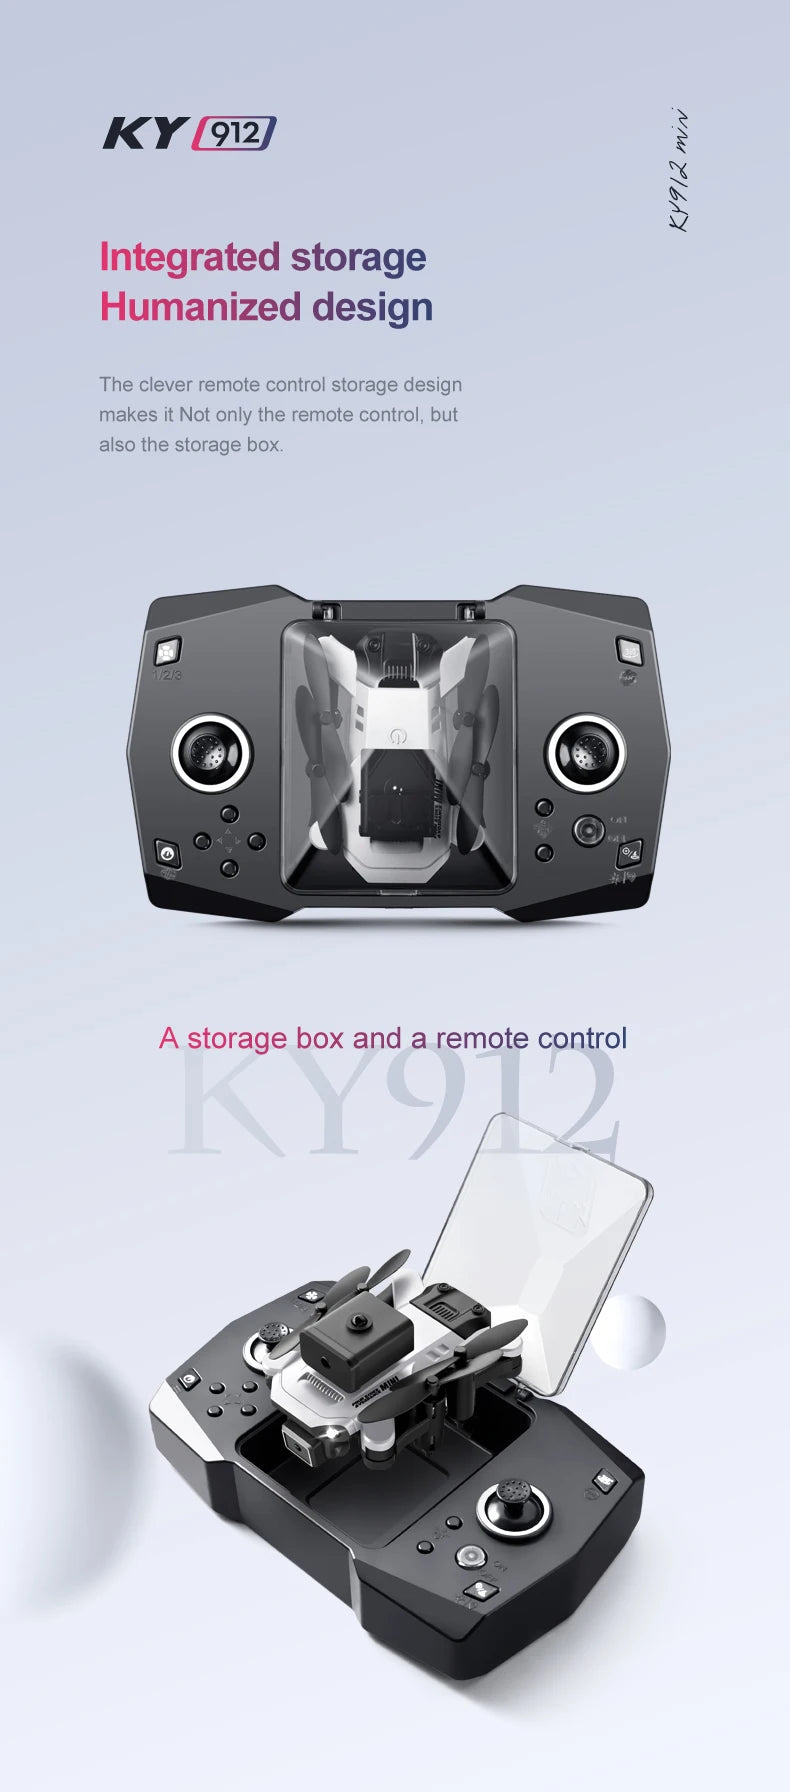 XYRC KY912 Mini Drone, clever storage design makes it not only the remote control, but also the